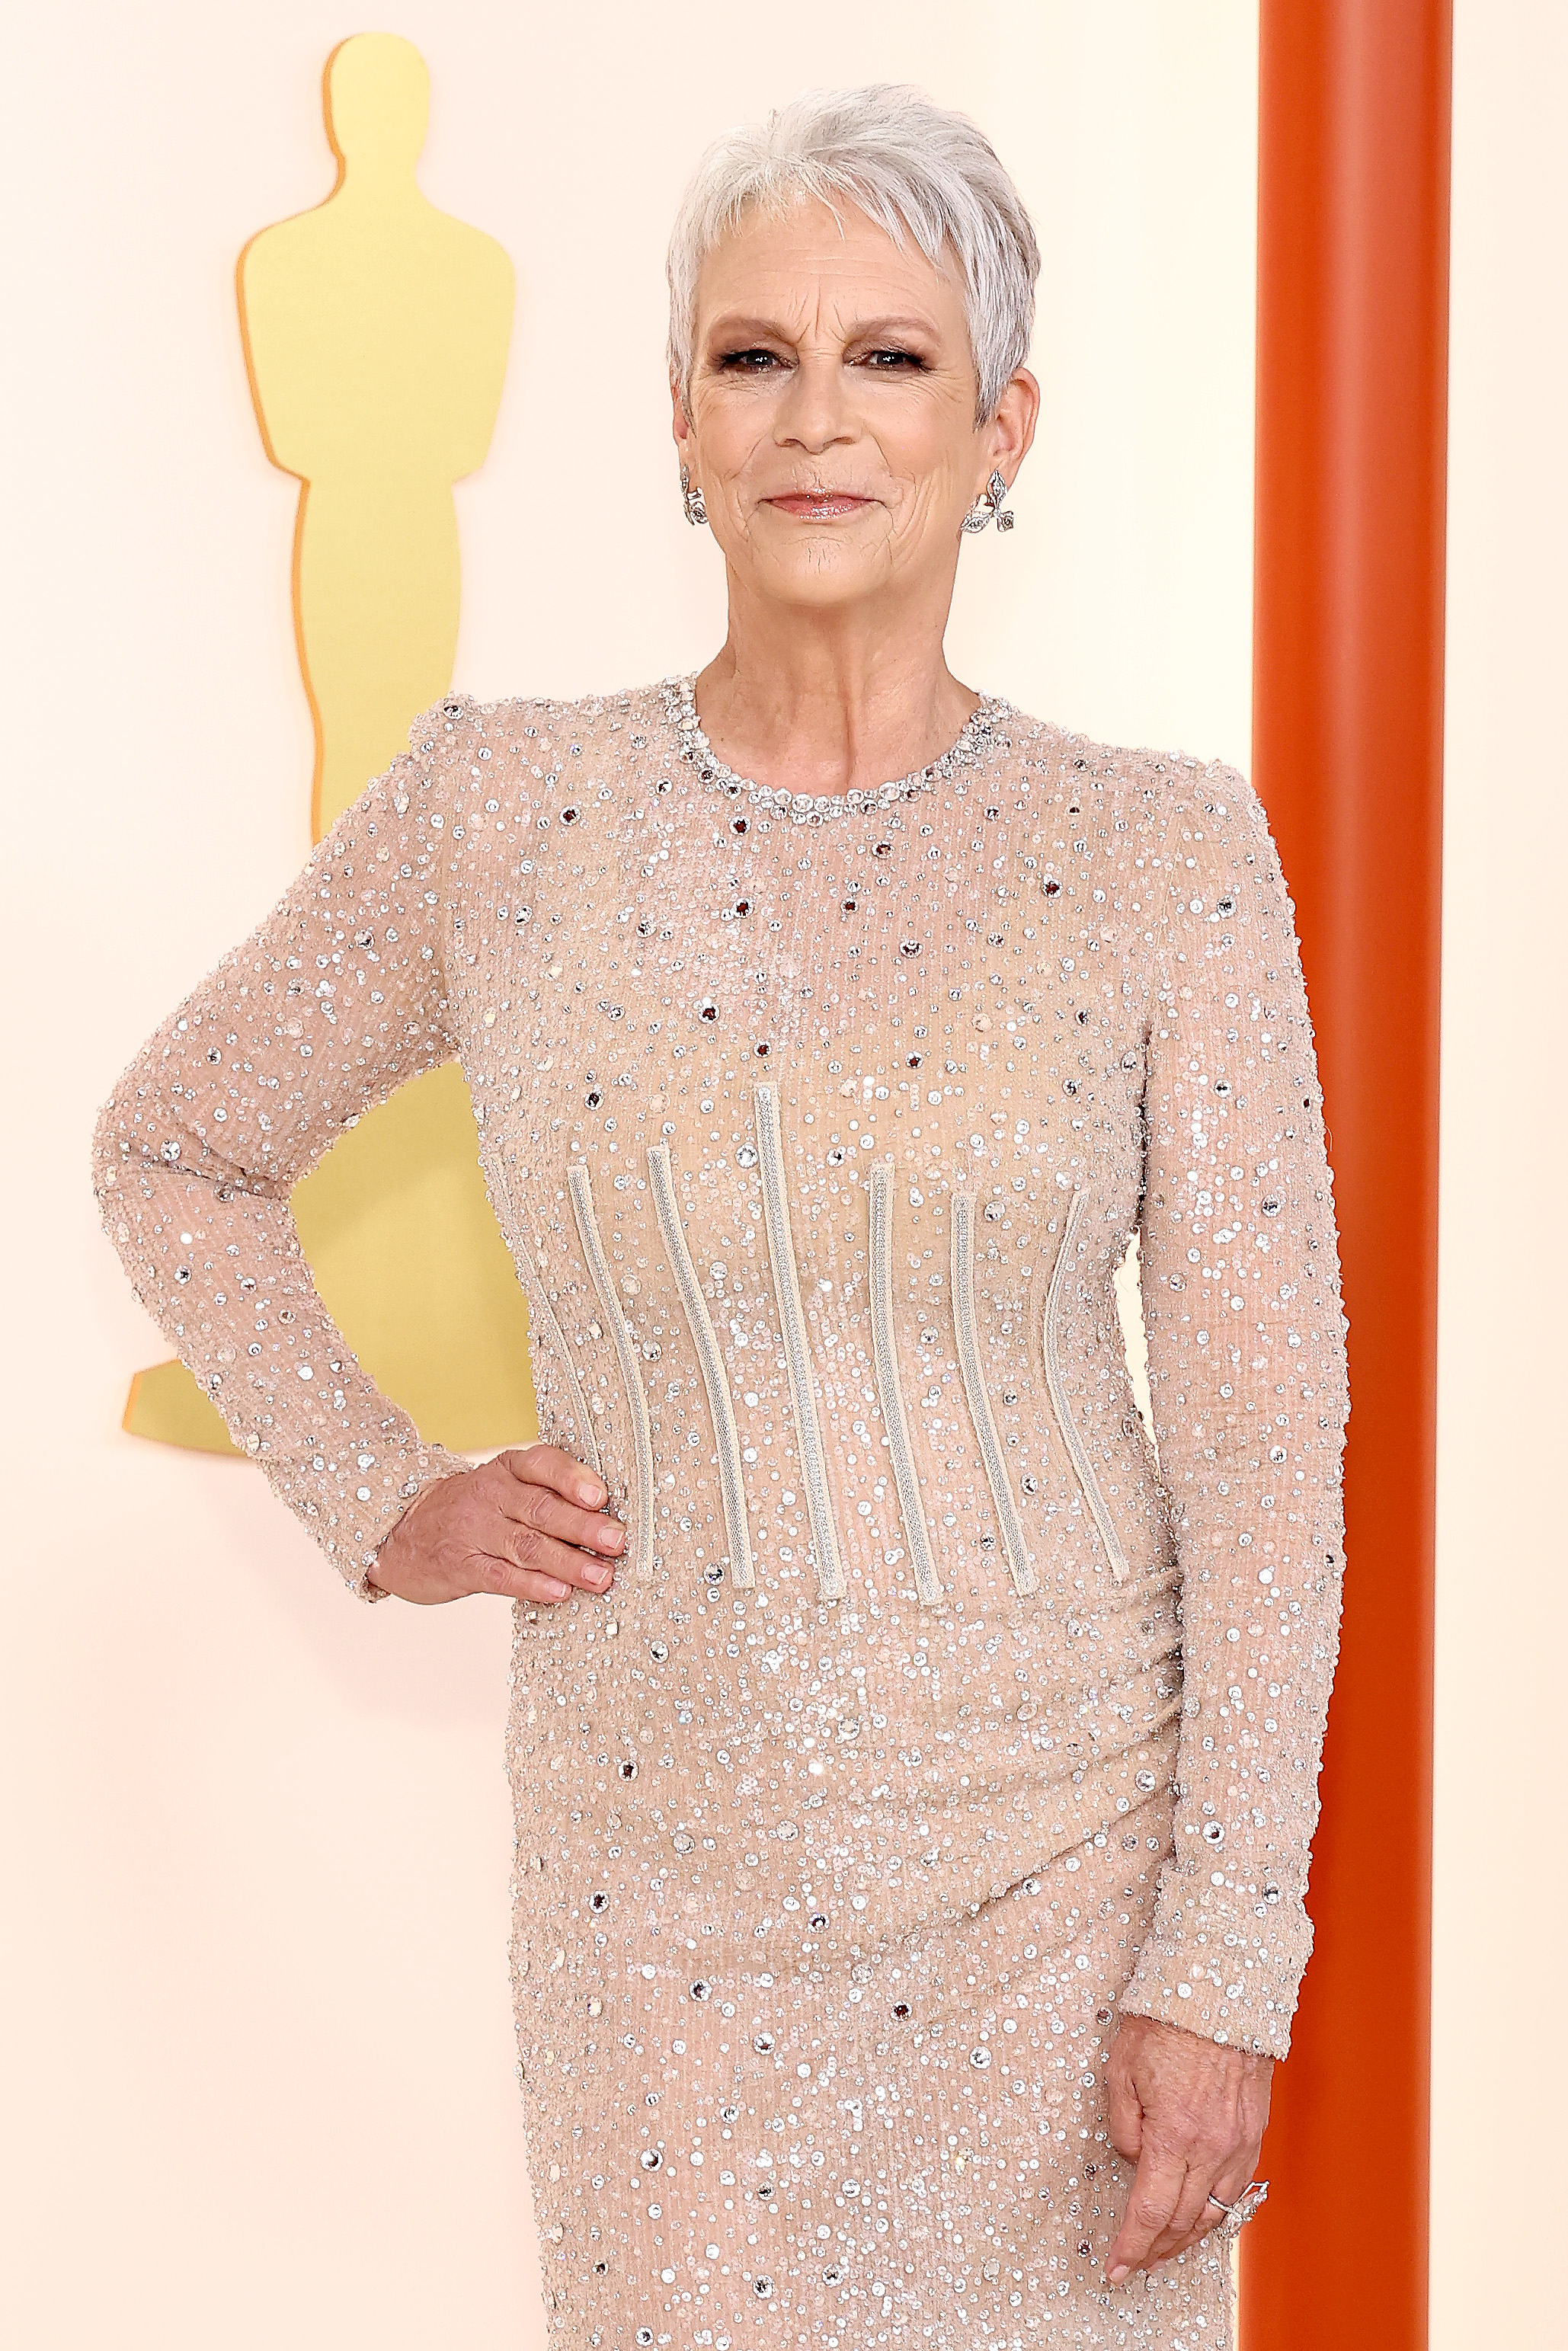 Jamie Lee Curtis poses in a long-sleeved, embellished dress at an awards event